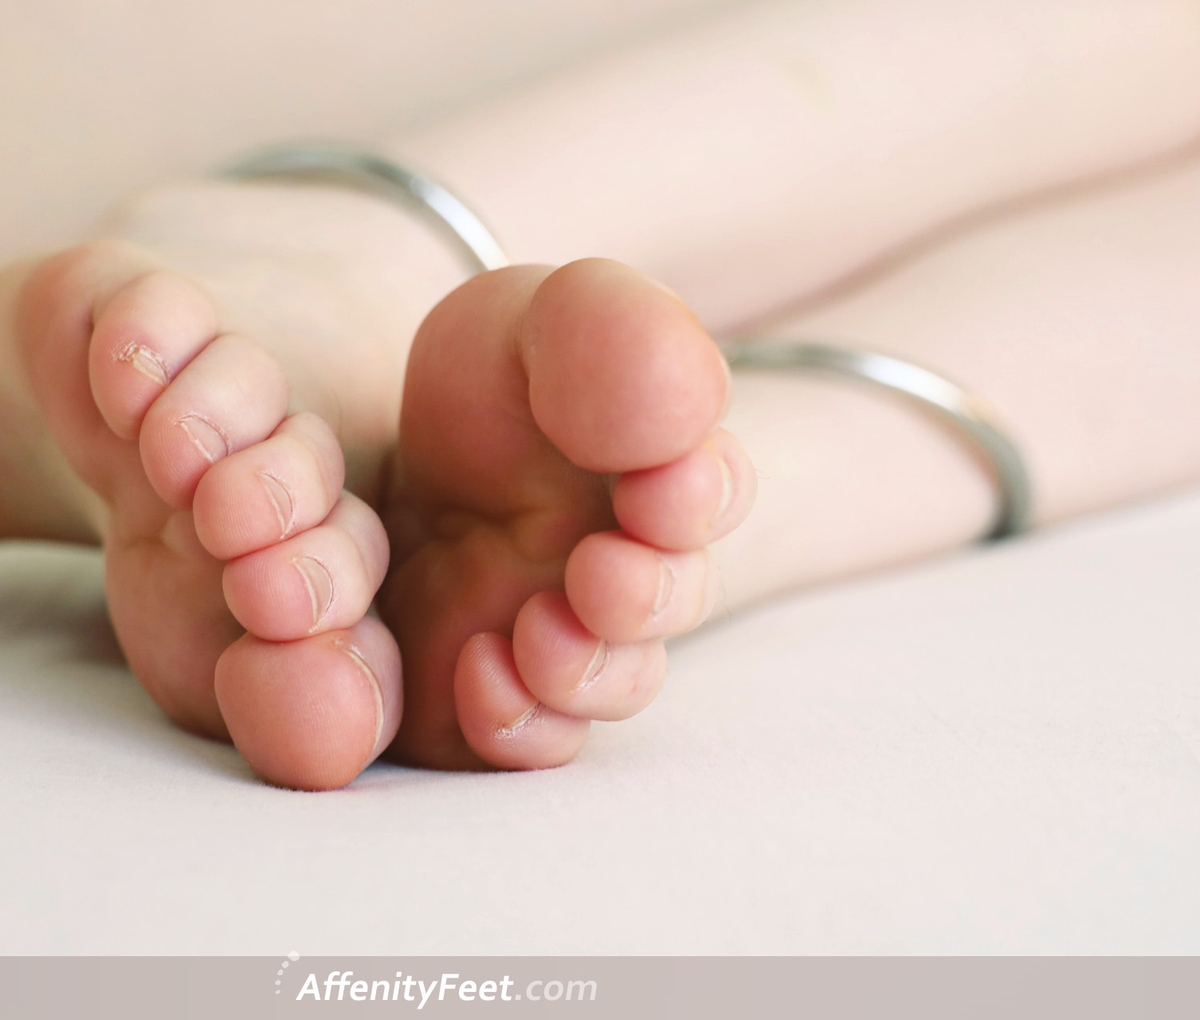 a Swiss girl named Affenity showing her toes